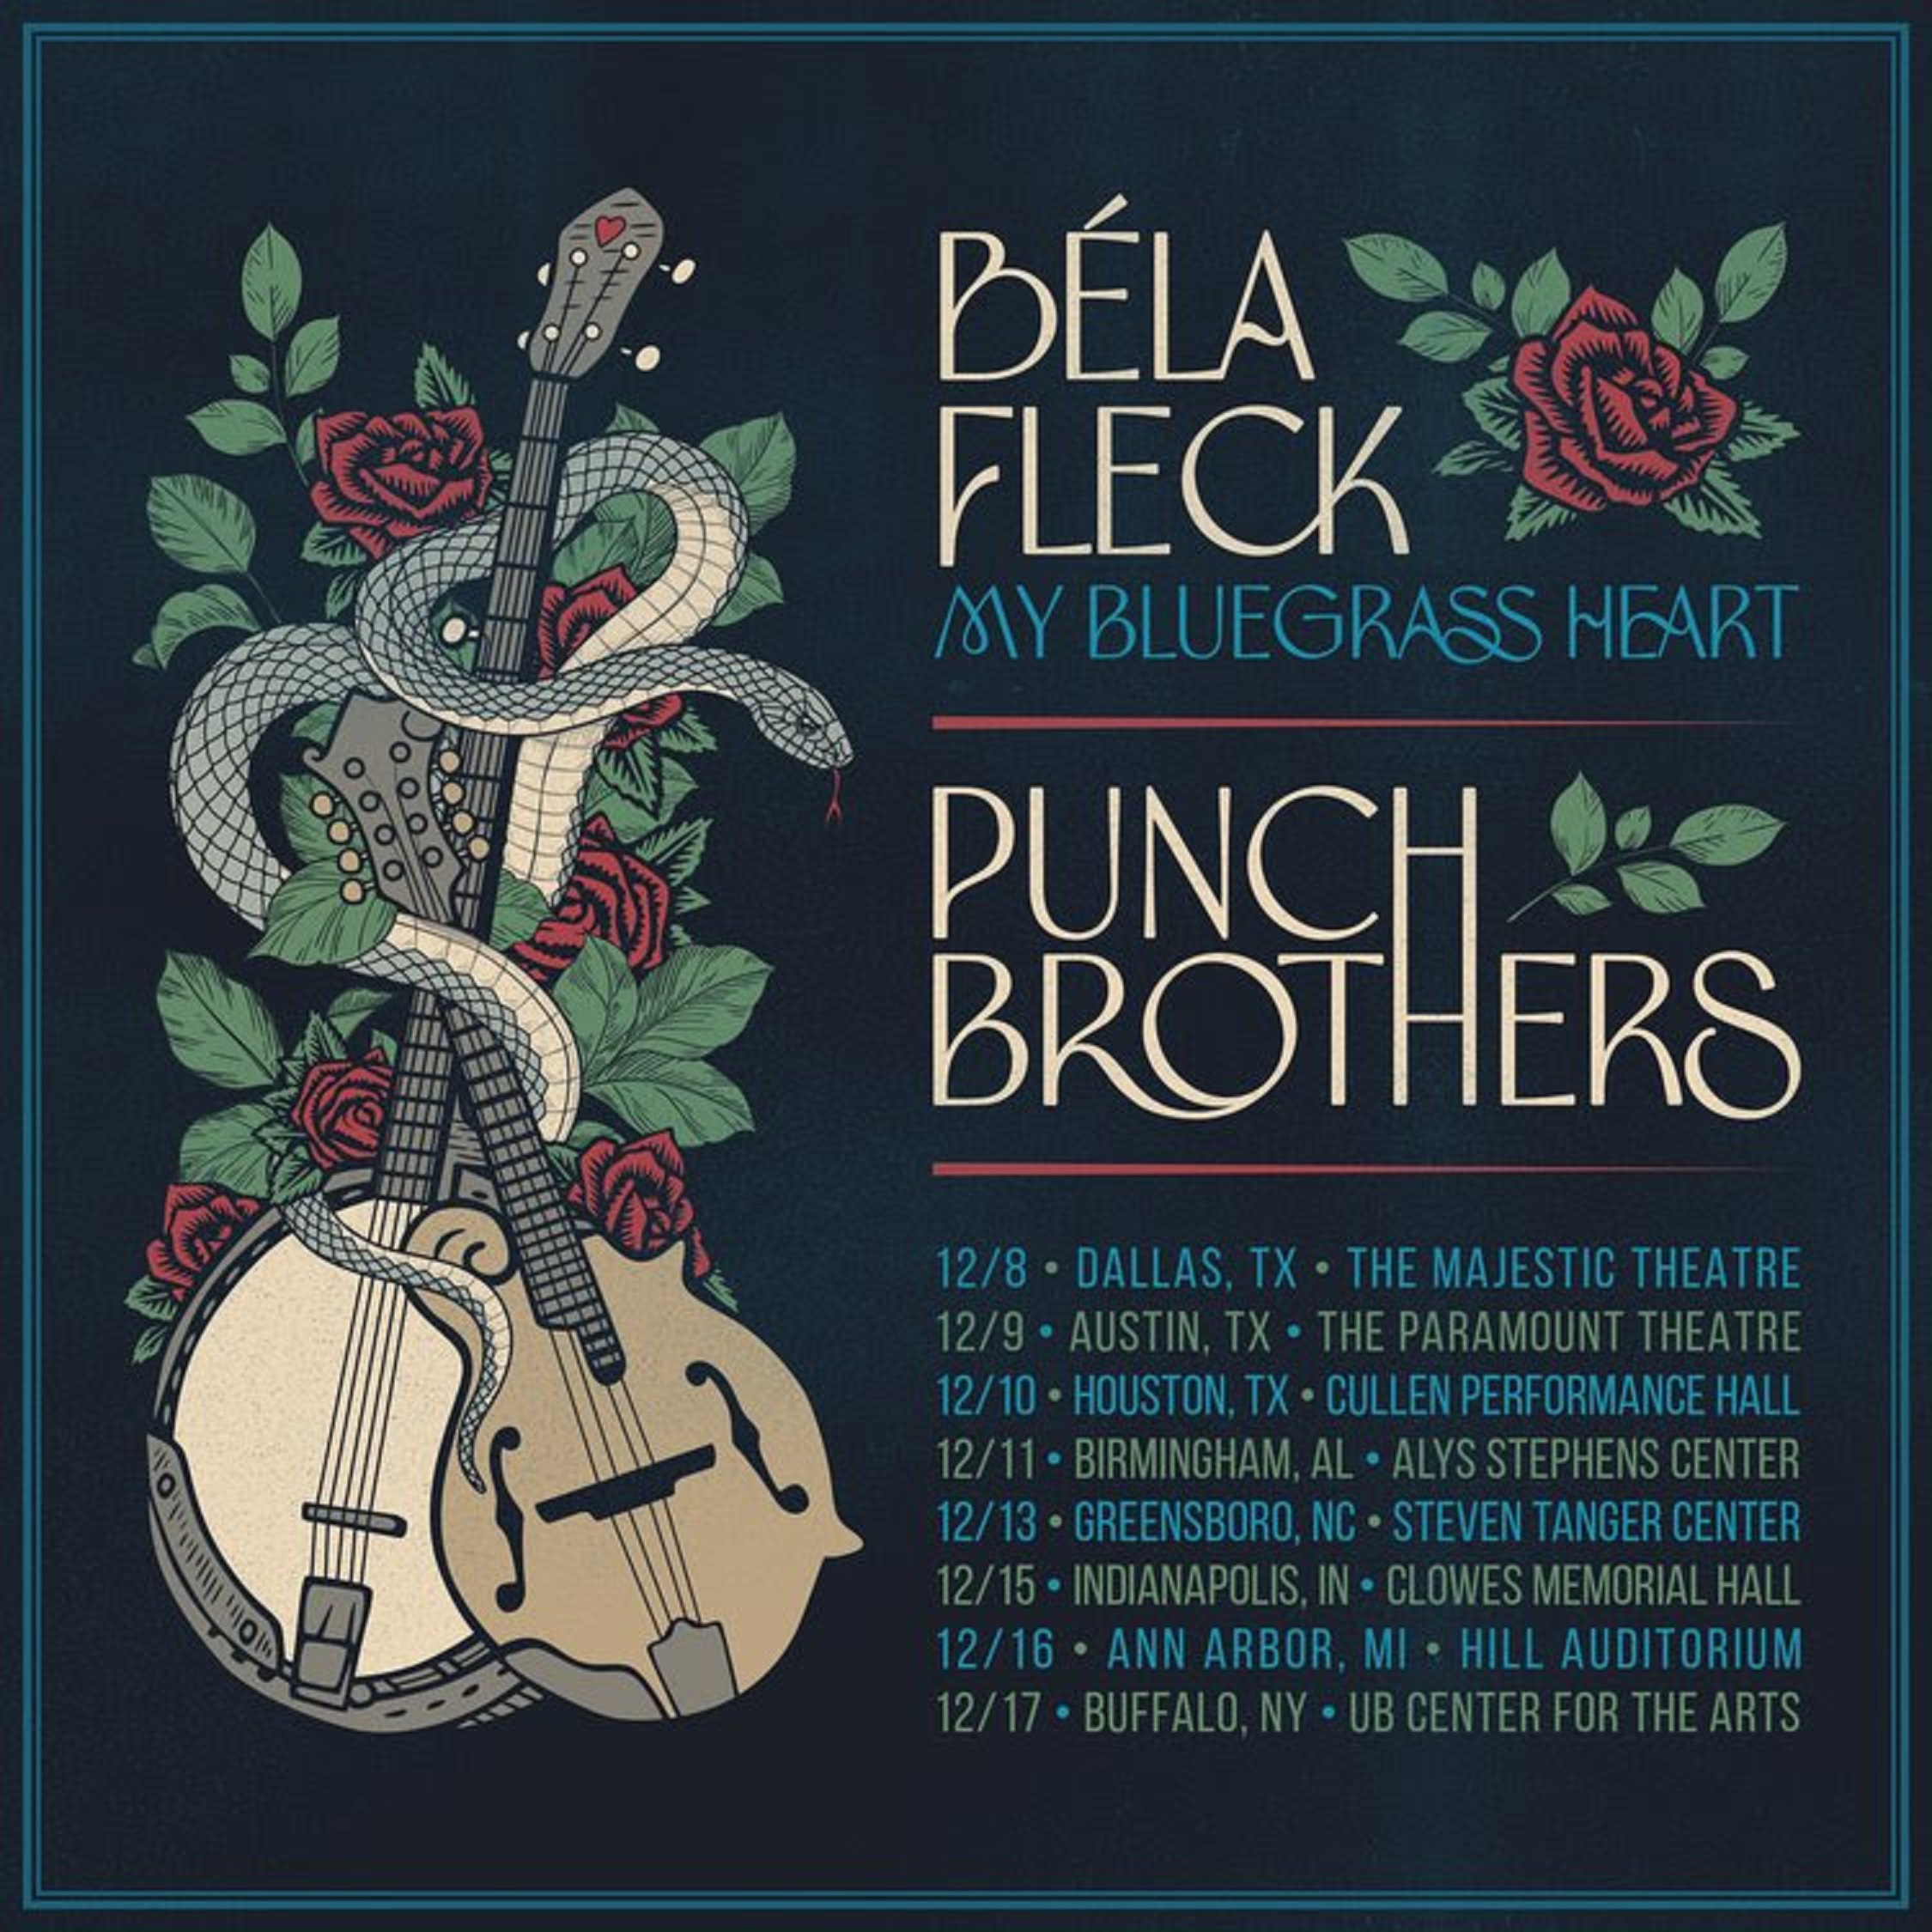 Béla & Punch Brothers on Tour + PBS Pledge Launches My Bluegrass Heart from the Ryman Auditorium